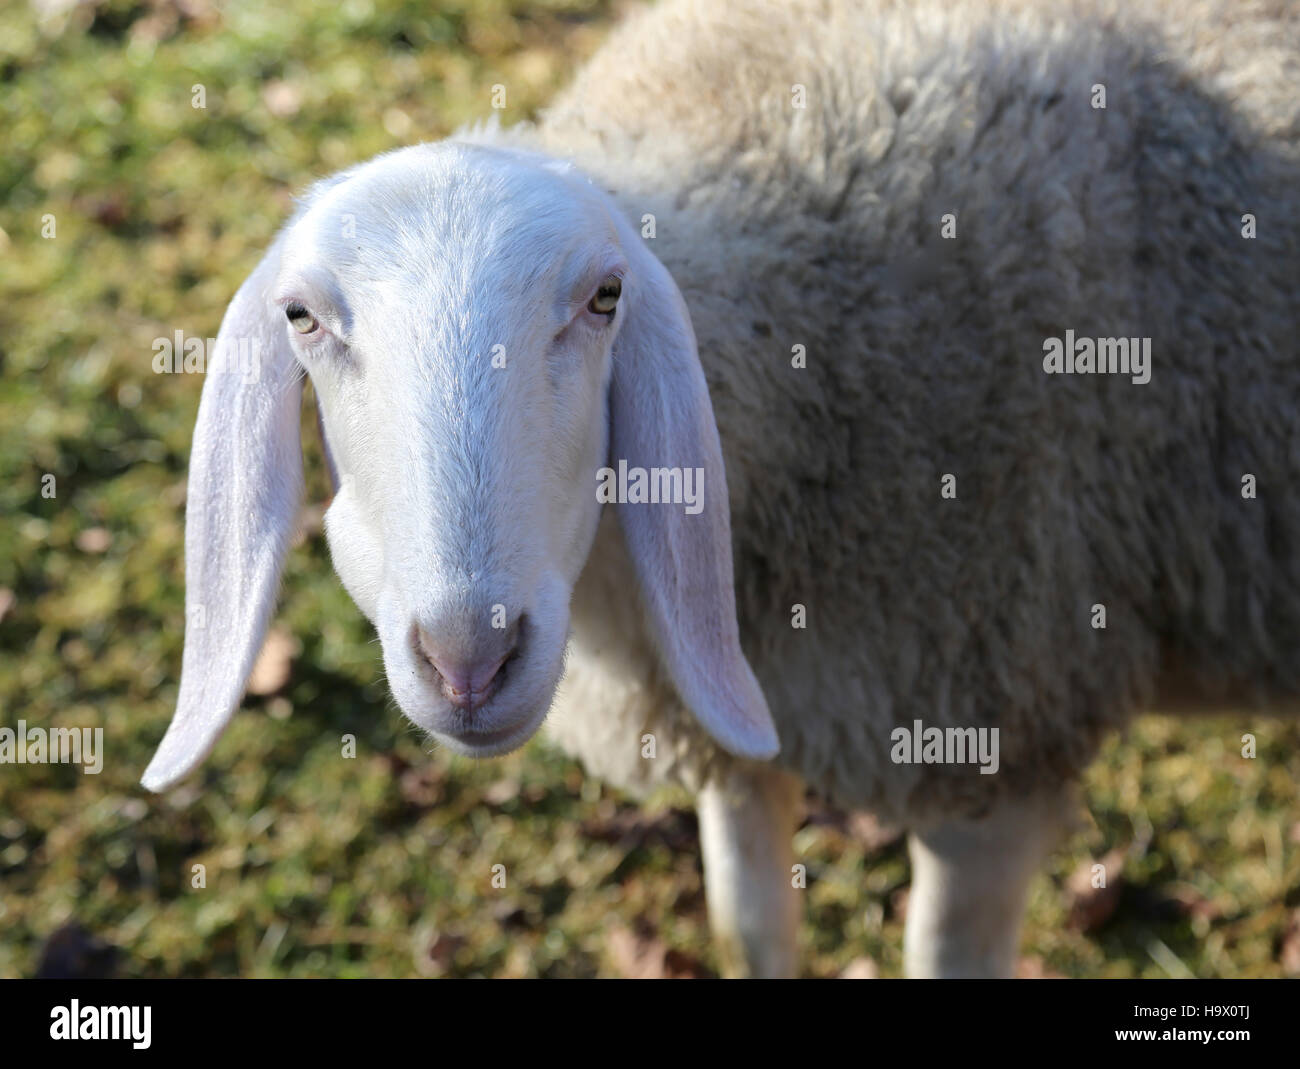 closeup of a sheep with long ears and woolly fleece Stock Photo